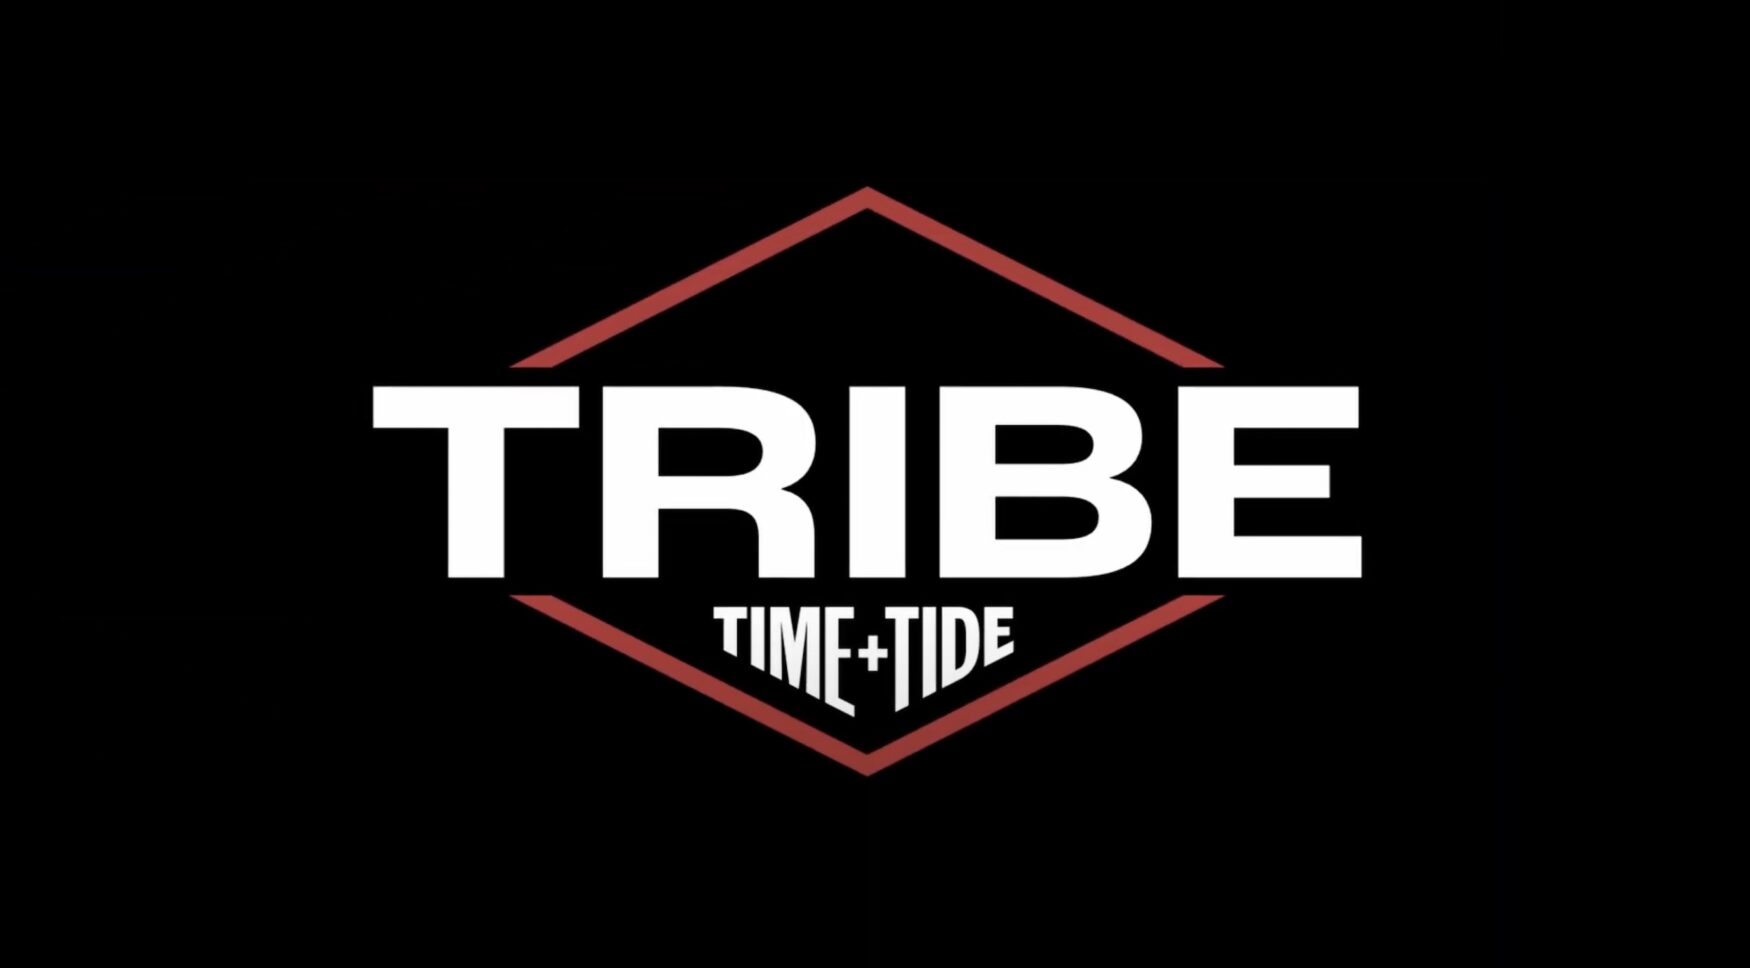 Meet Time+Tide Tribe: our new channel that we would love for you to follow